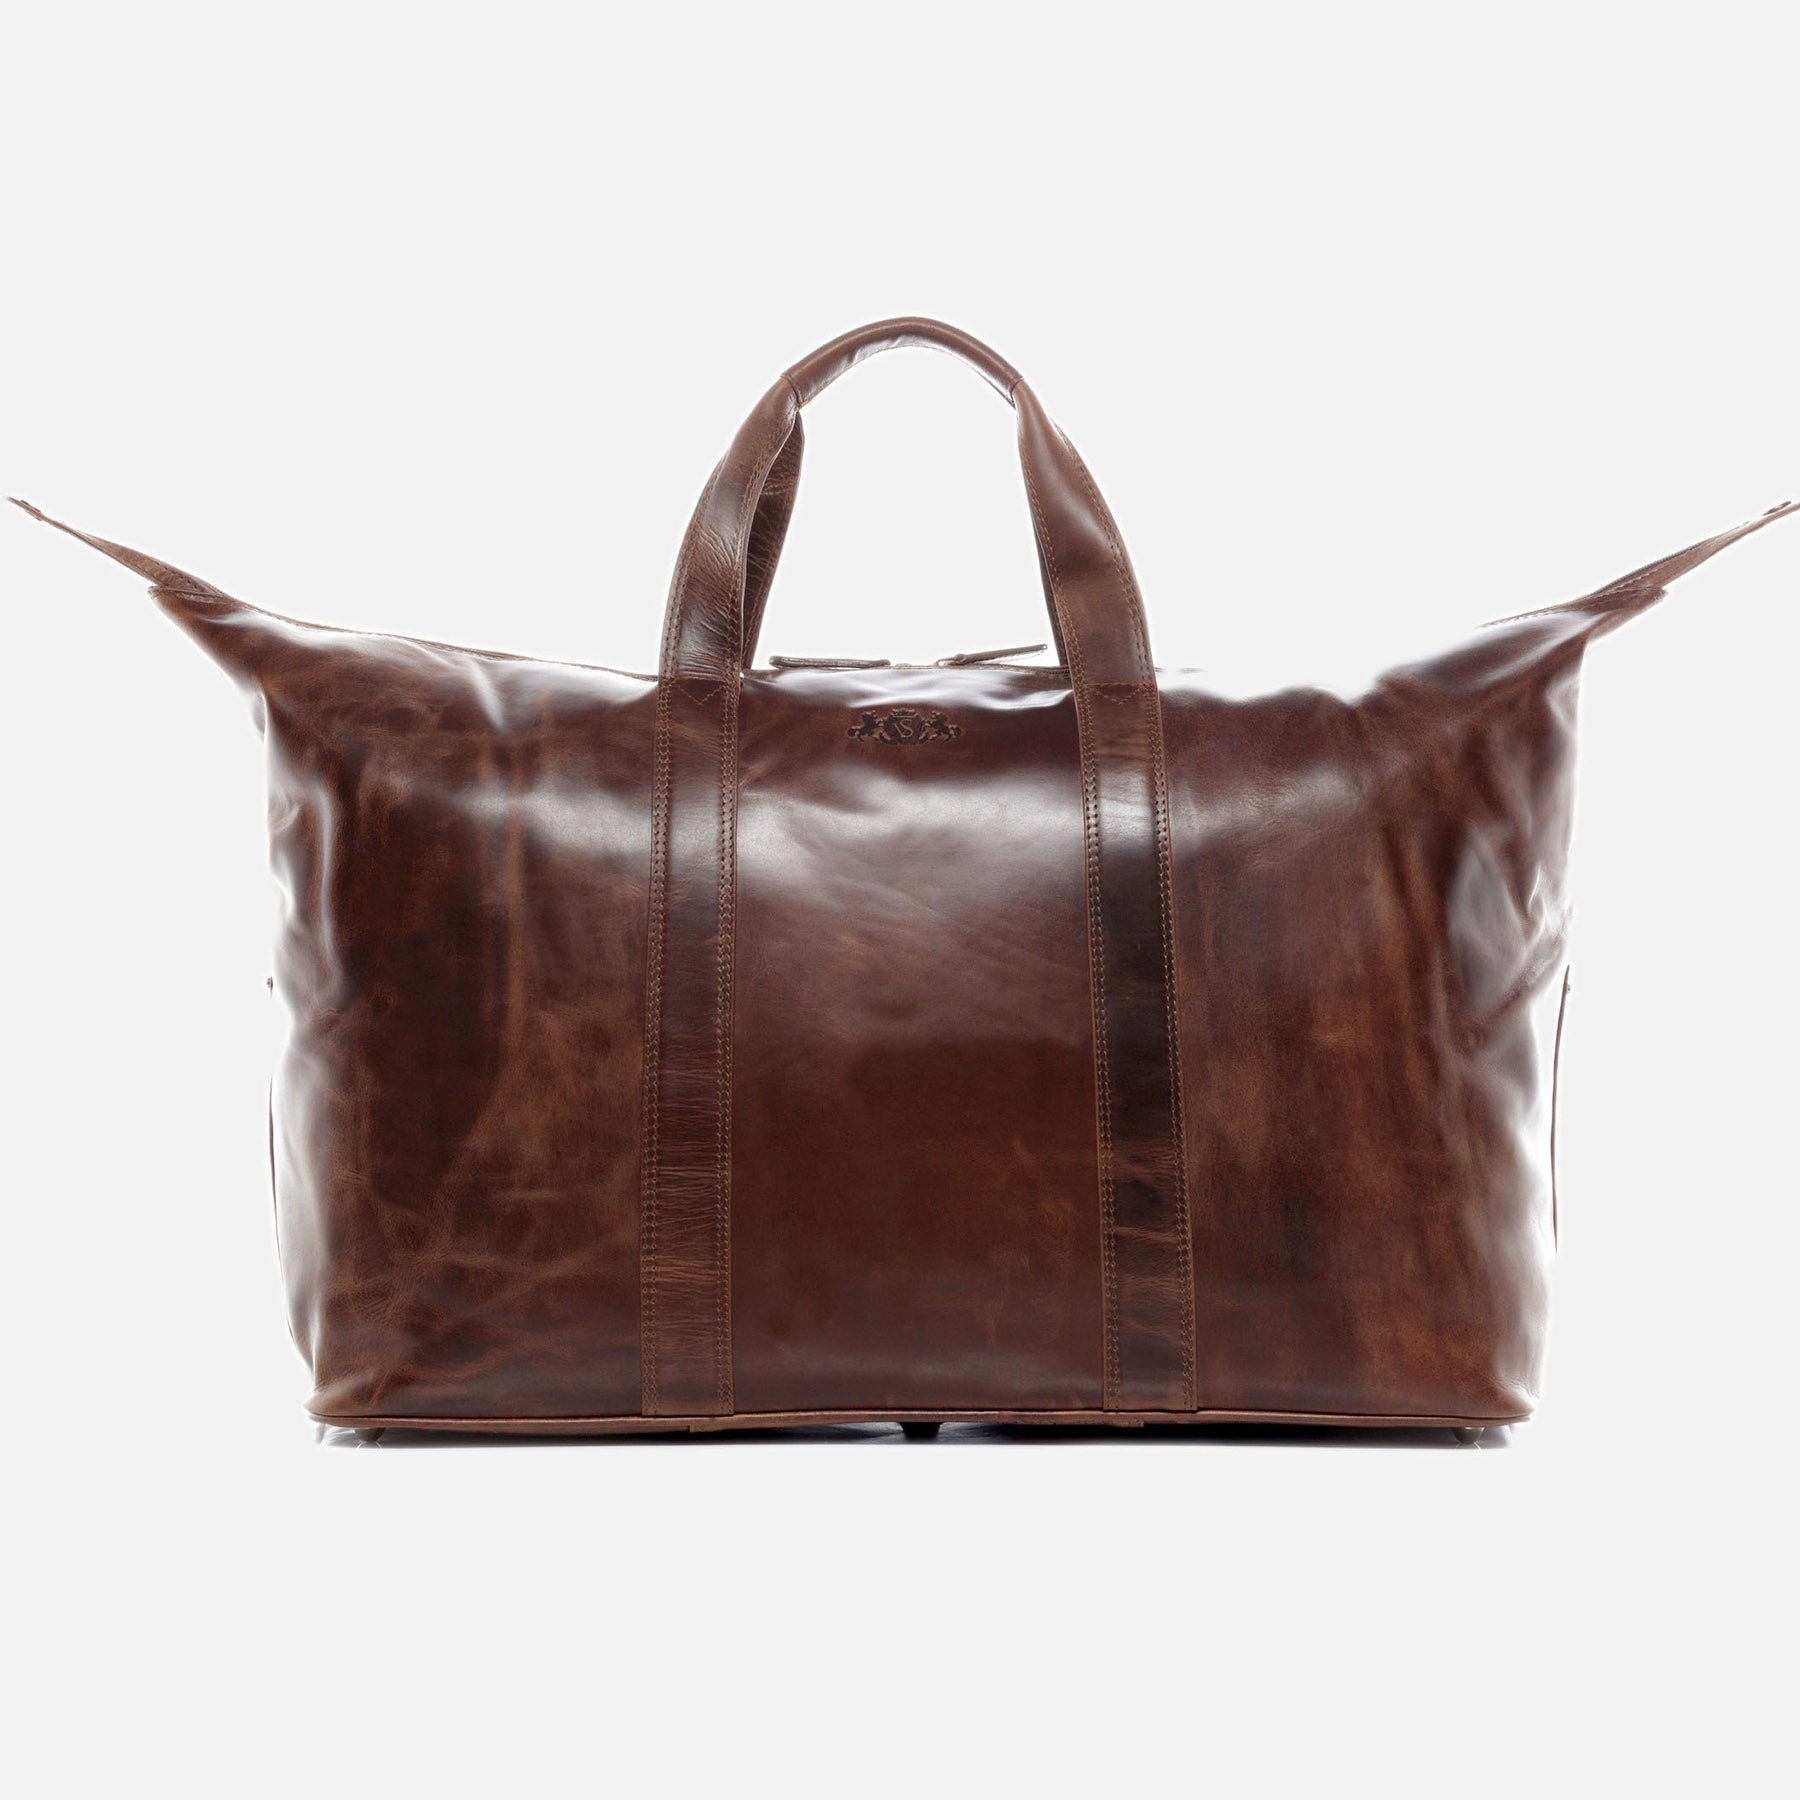 Travel bag with address tag CHESTER natural leather brown-cognac